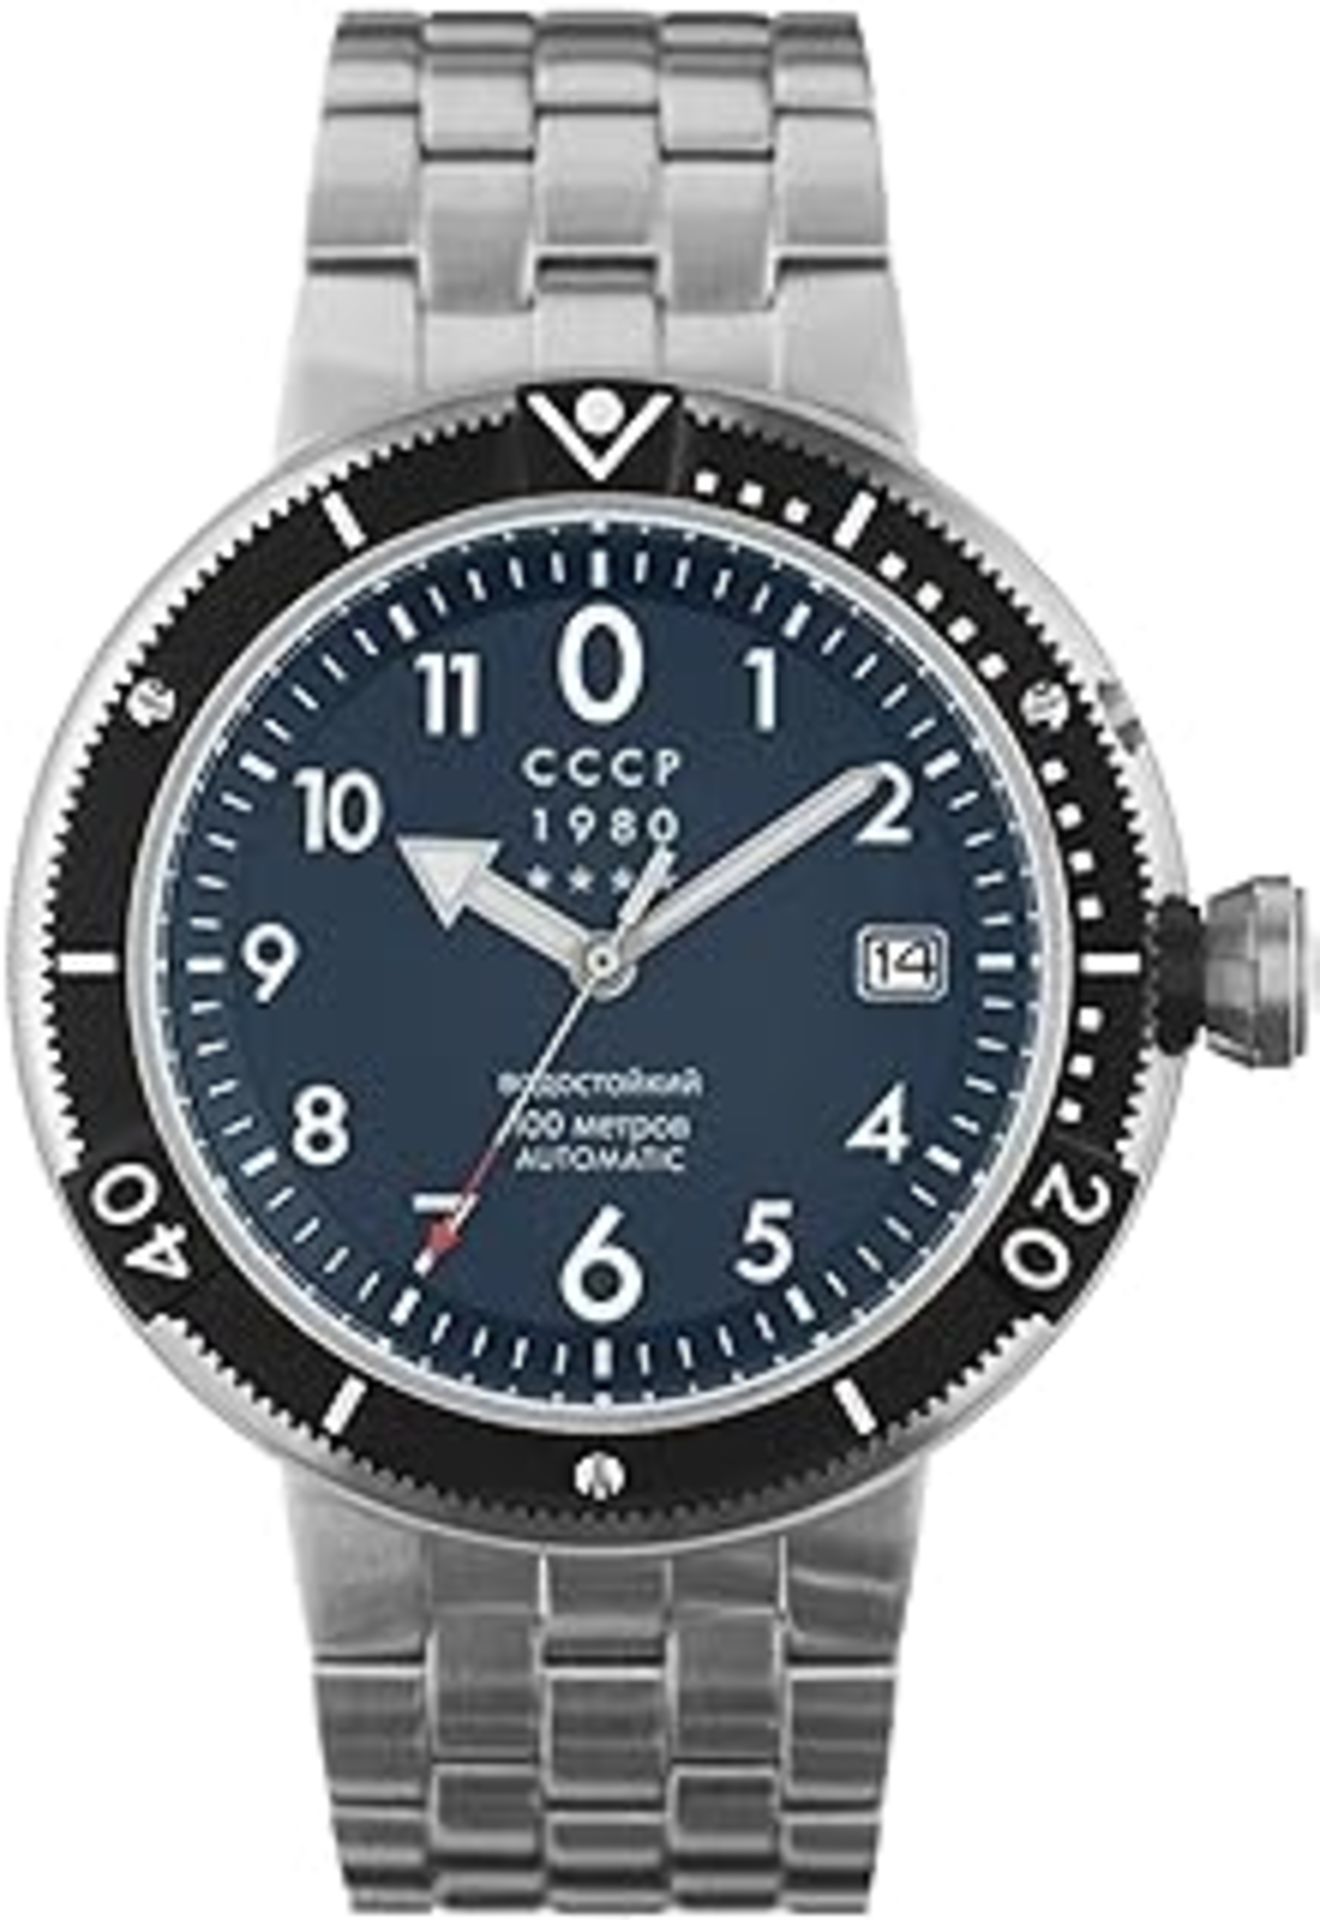 CCCP KASHALOT SUBMARINE Automatic Watch - CP-7004-55 - Image 3 of 4